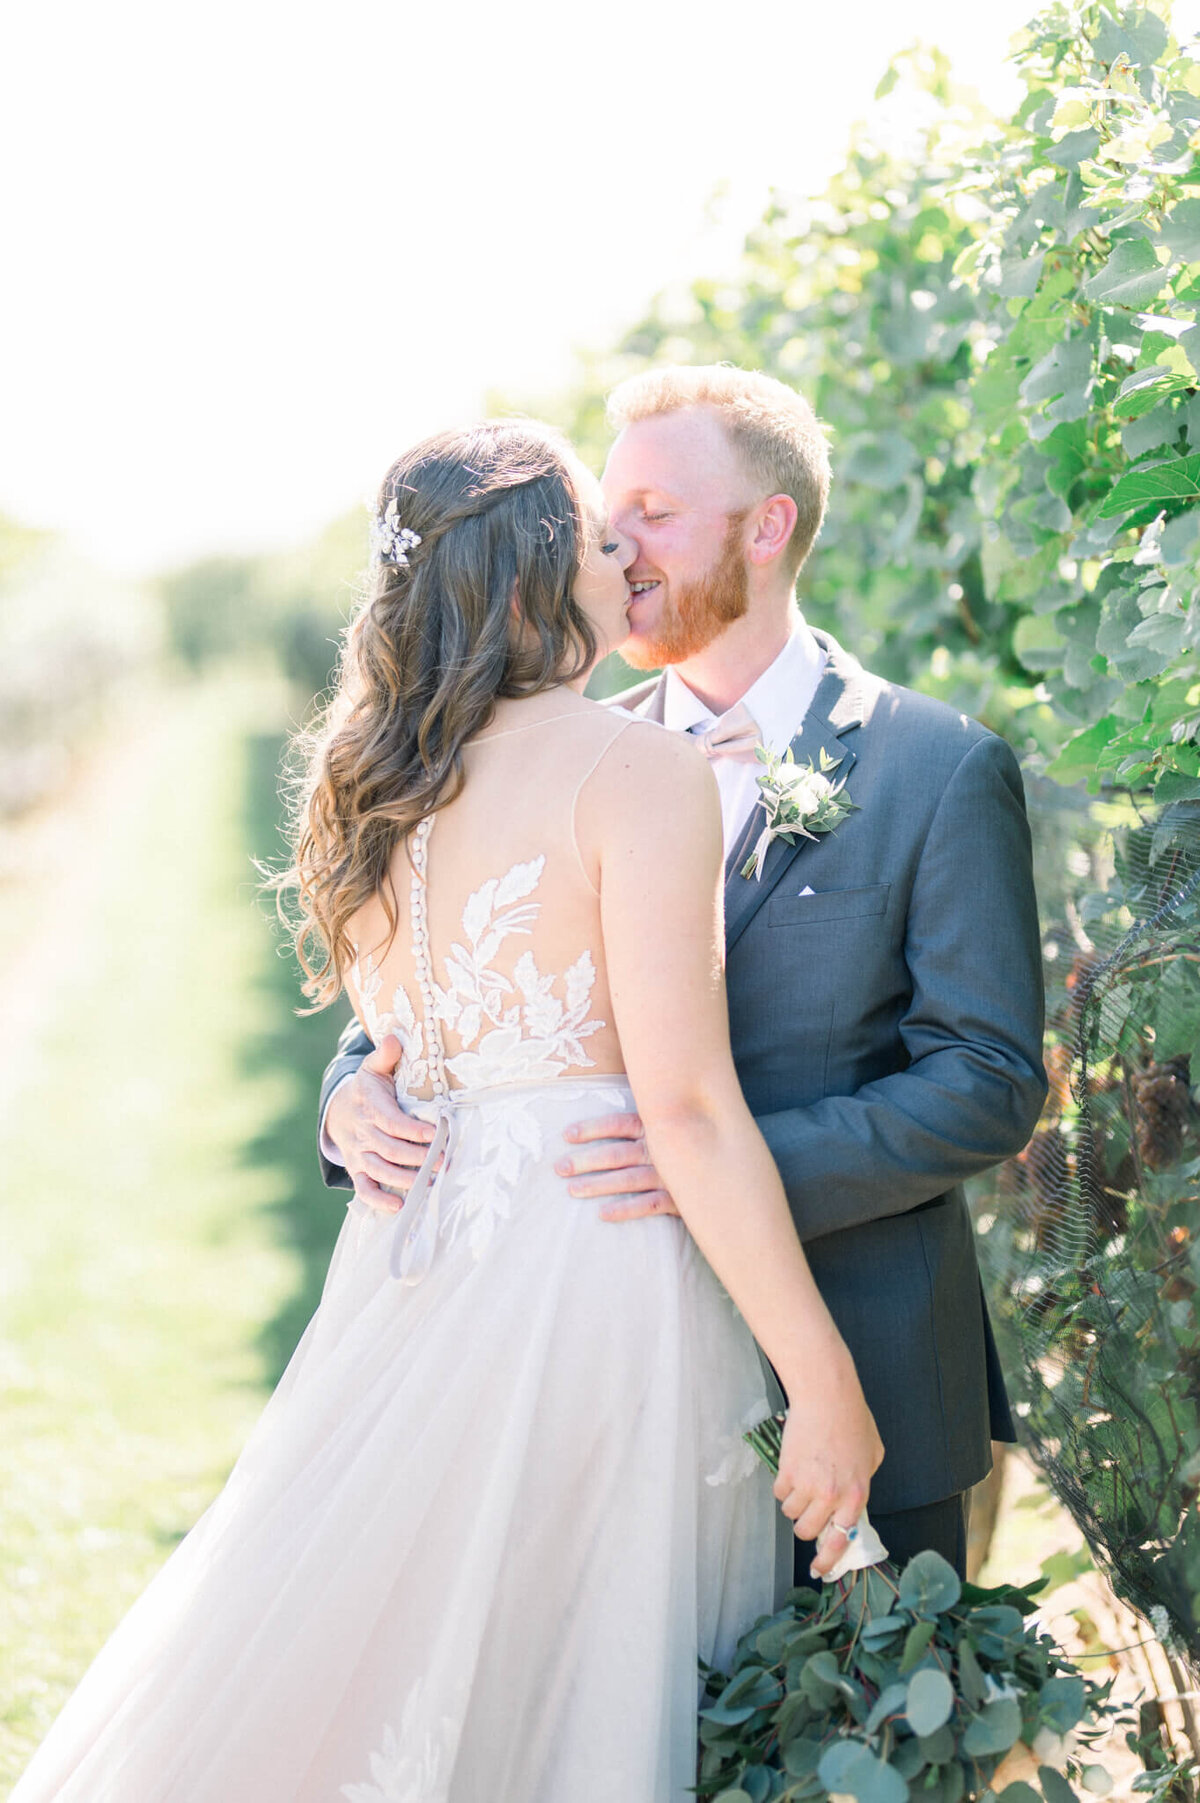 Bride and groom in a vineyard for their first look photos